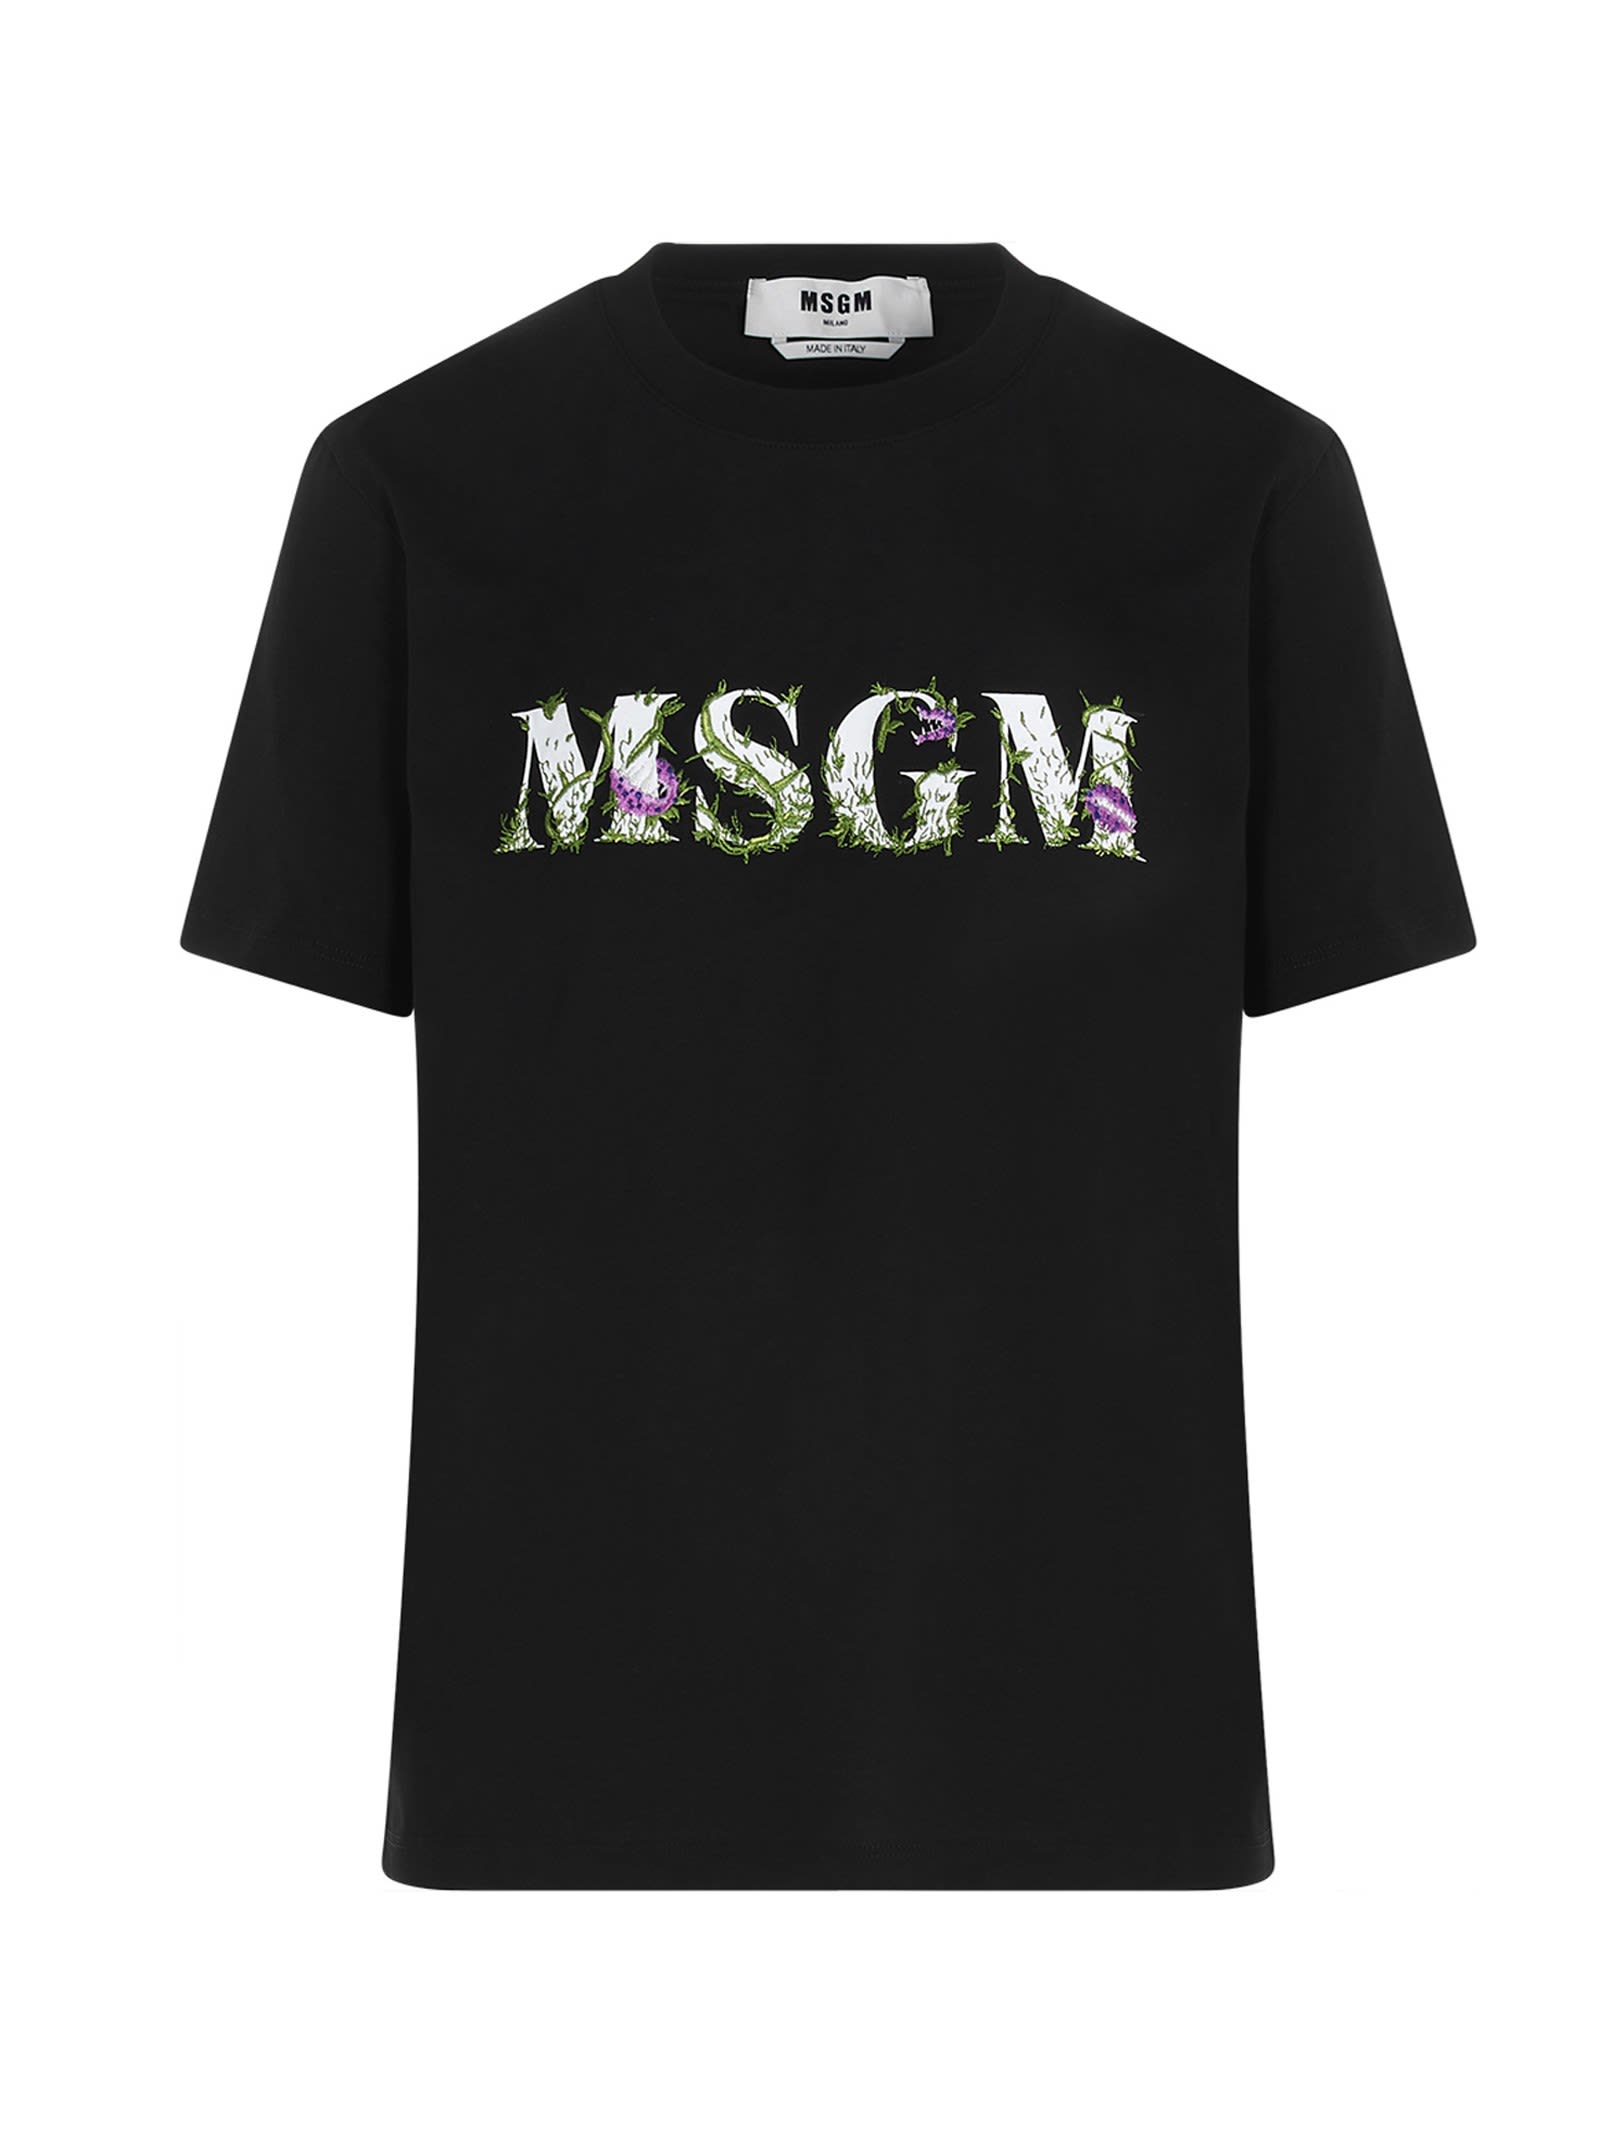 MSGM Floral Embroidered Logo T-shirt